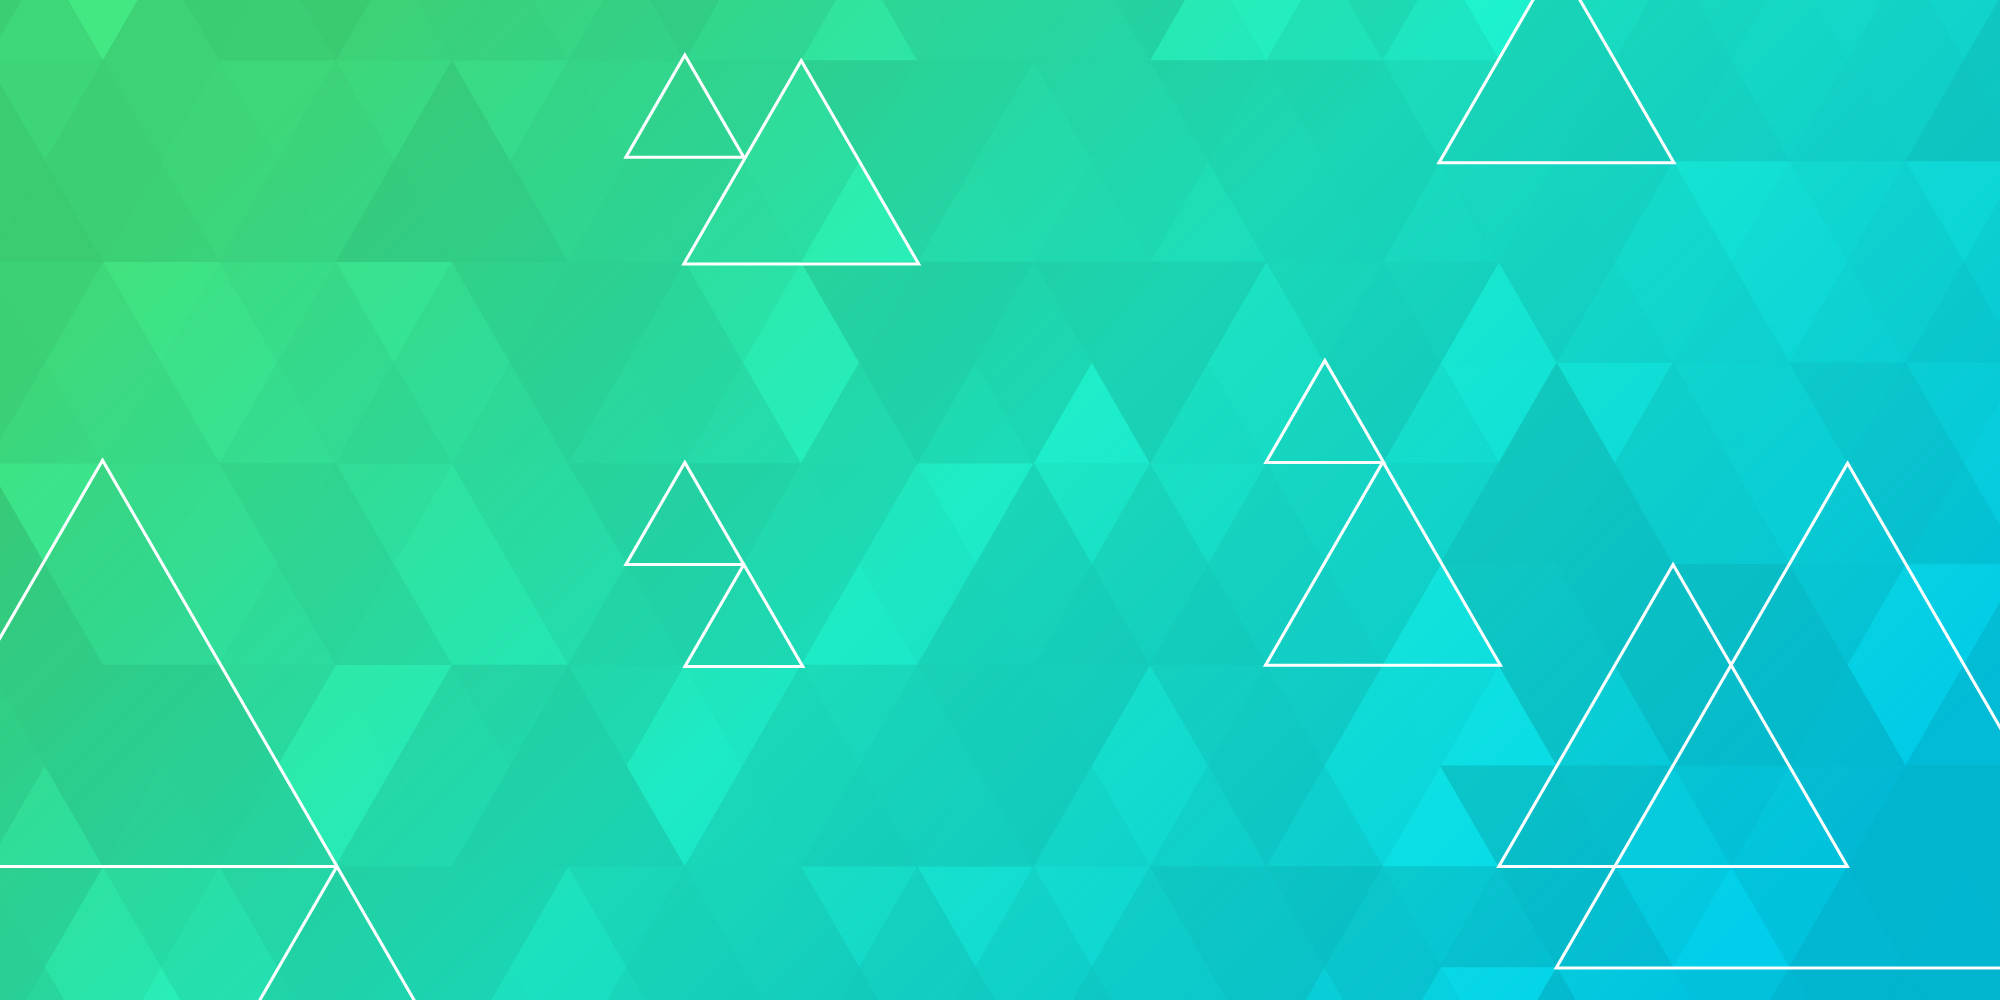 Green, teal, and blue gradient triangle pattern